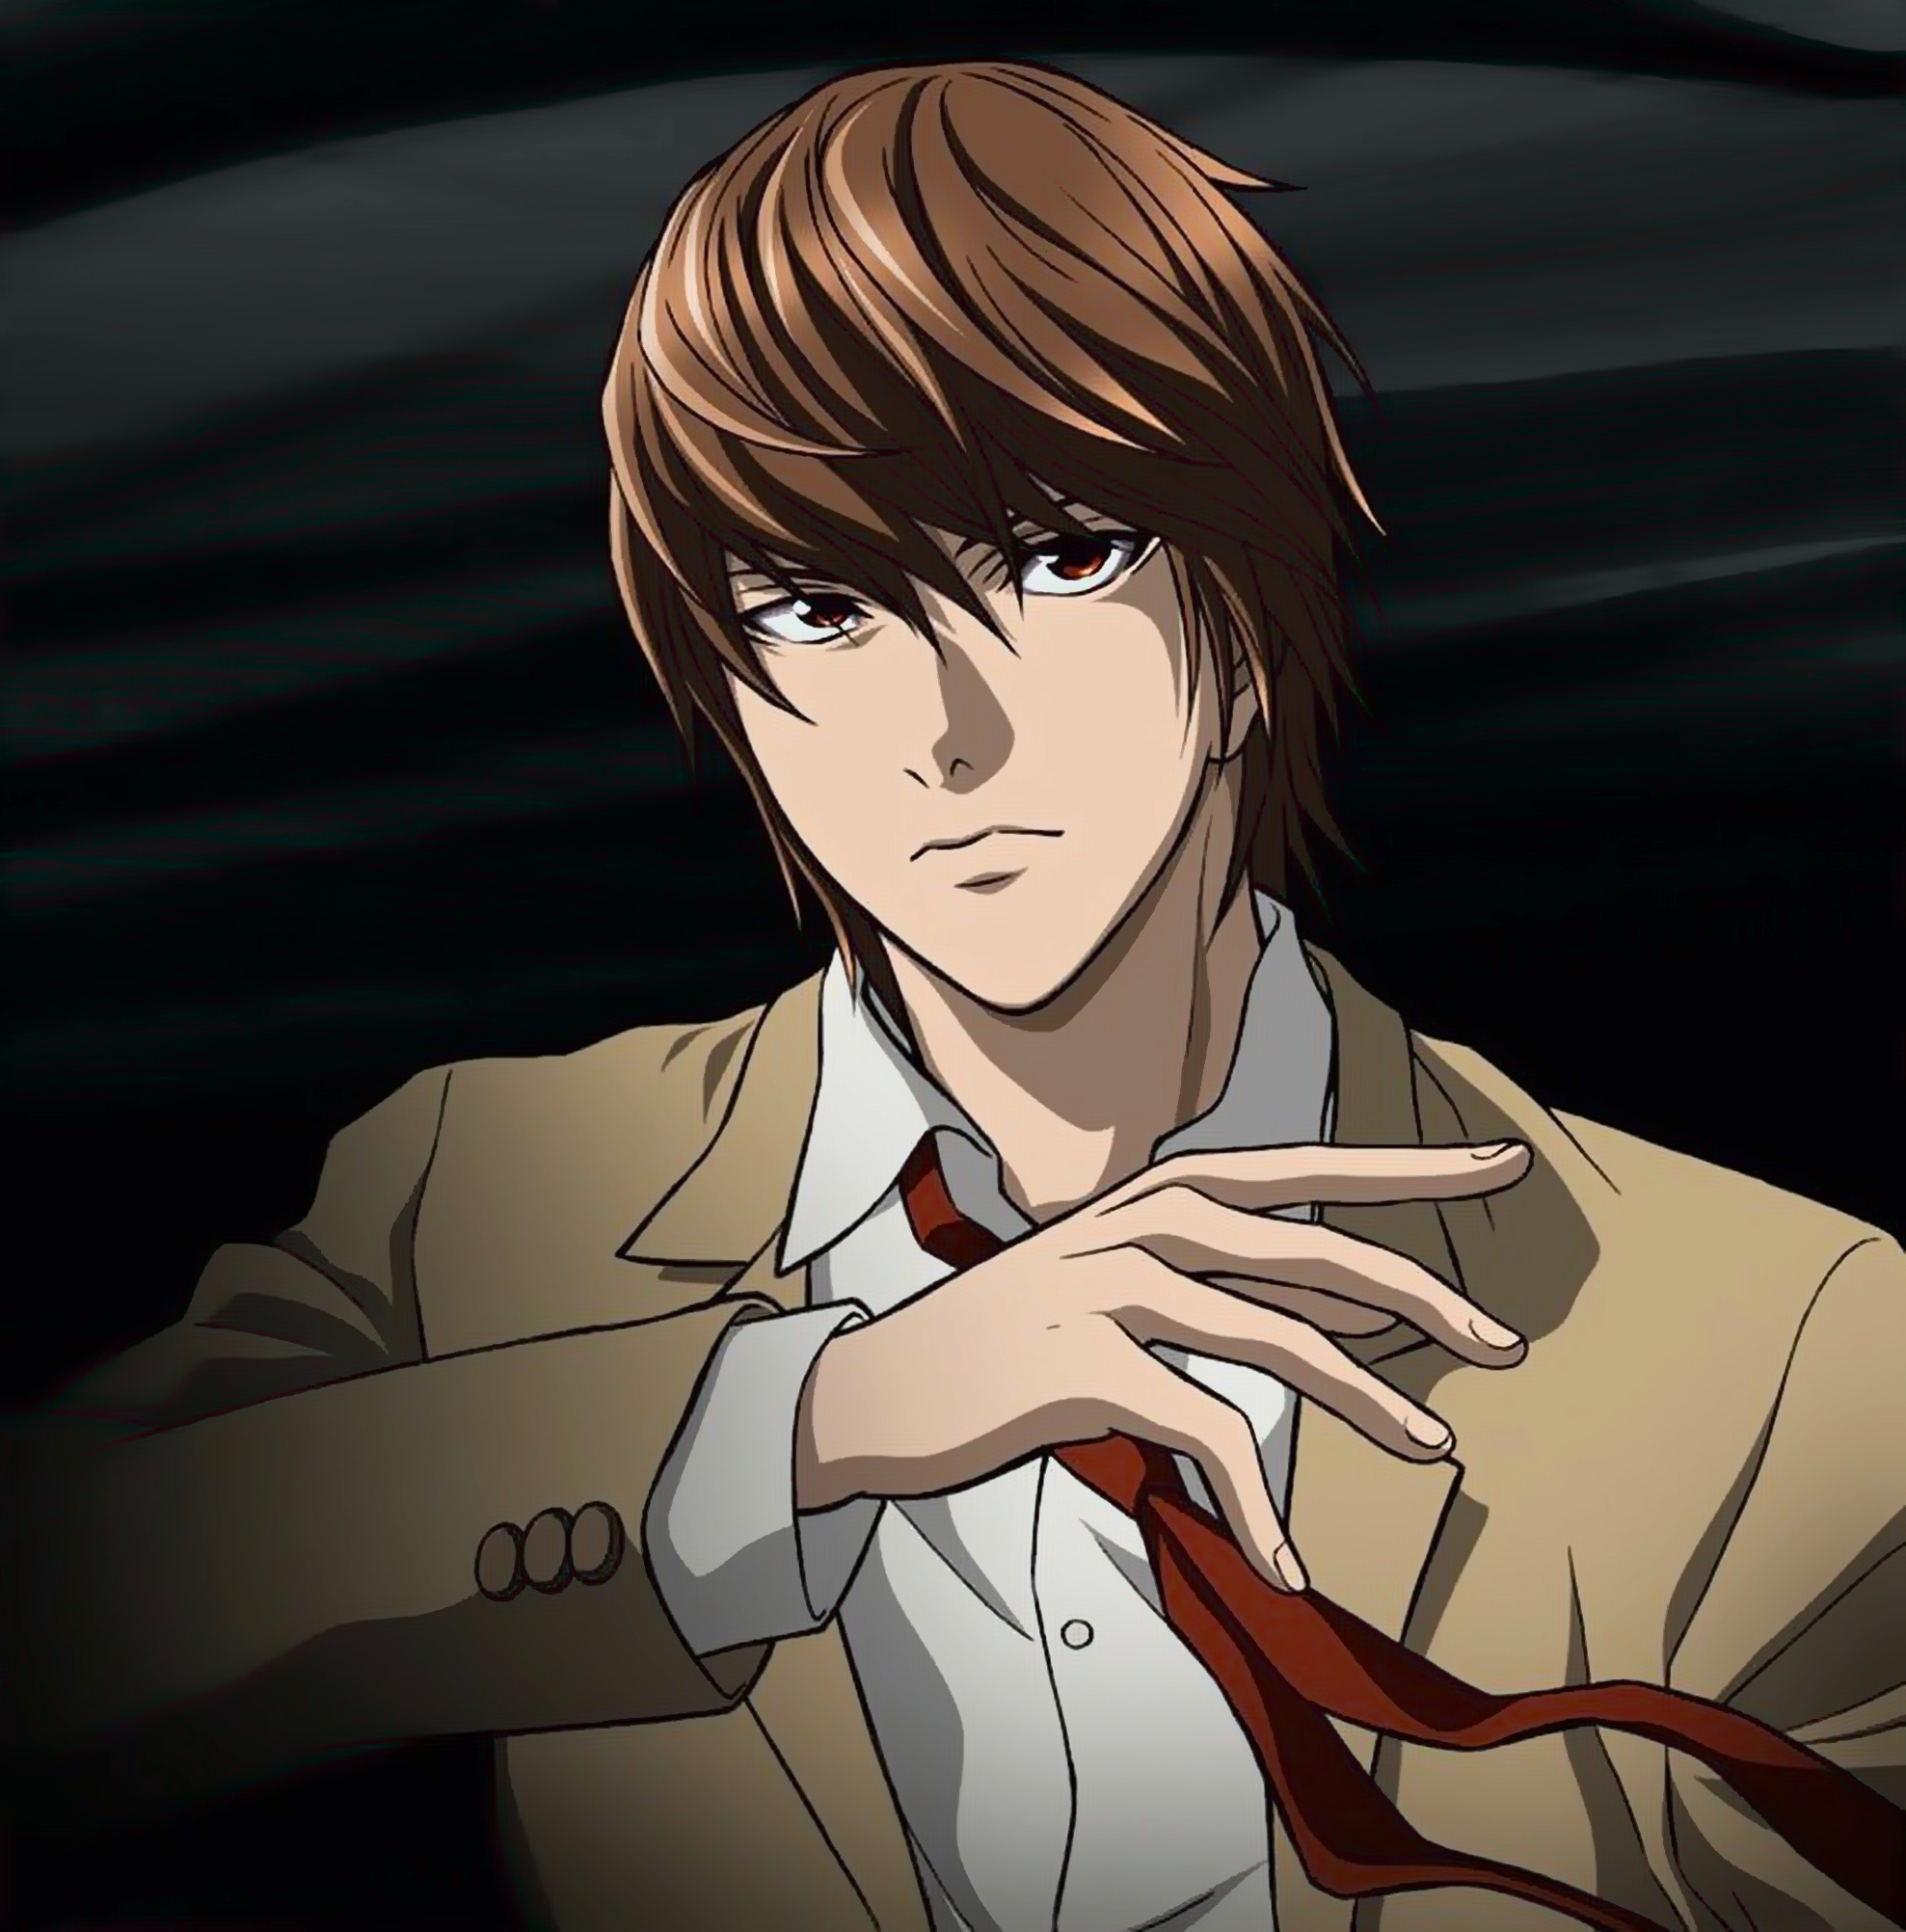 In the anime Death Note, why is the character Light Yagami portrayed as an  anti-hero? - Quora